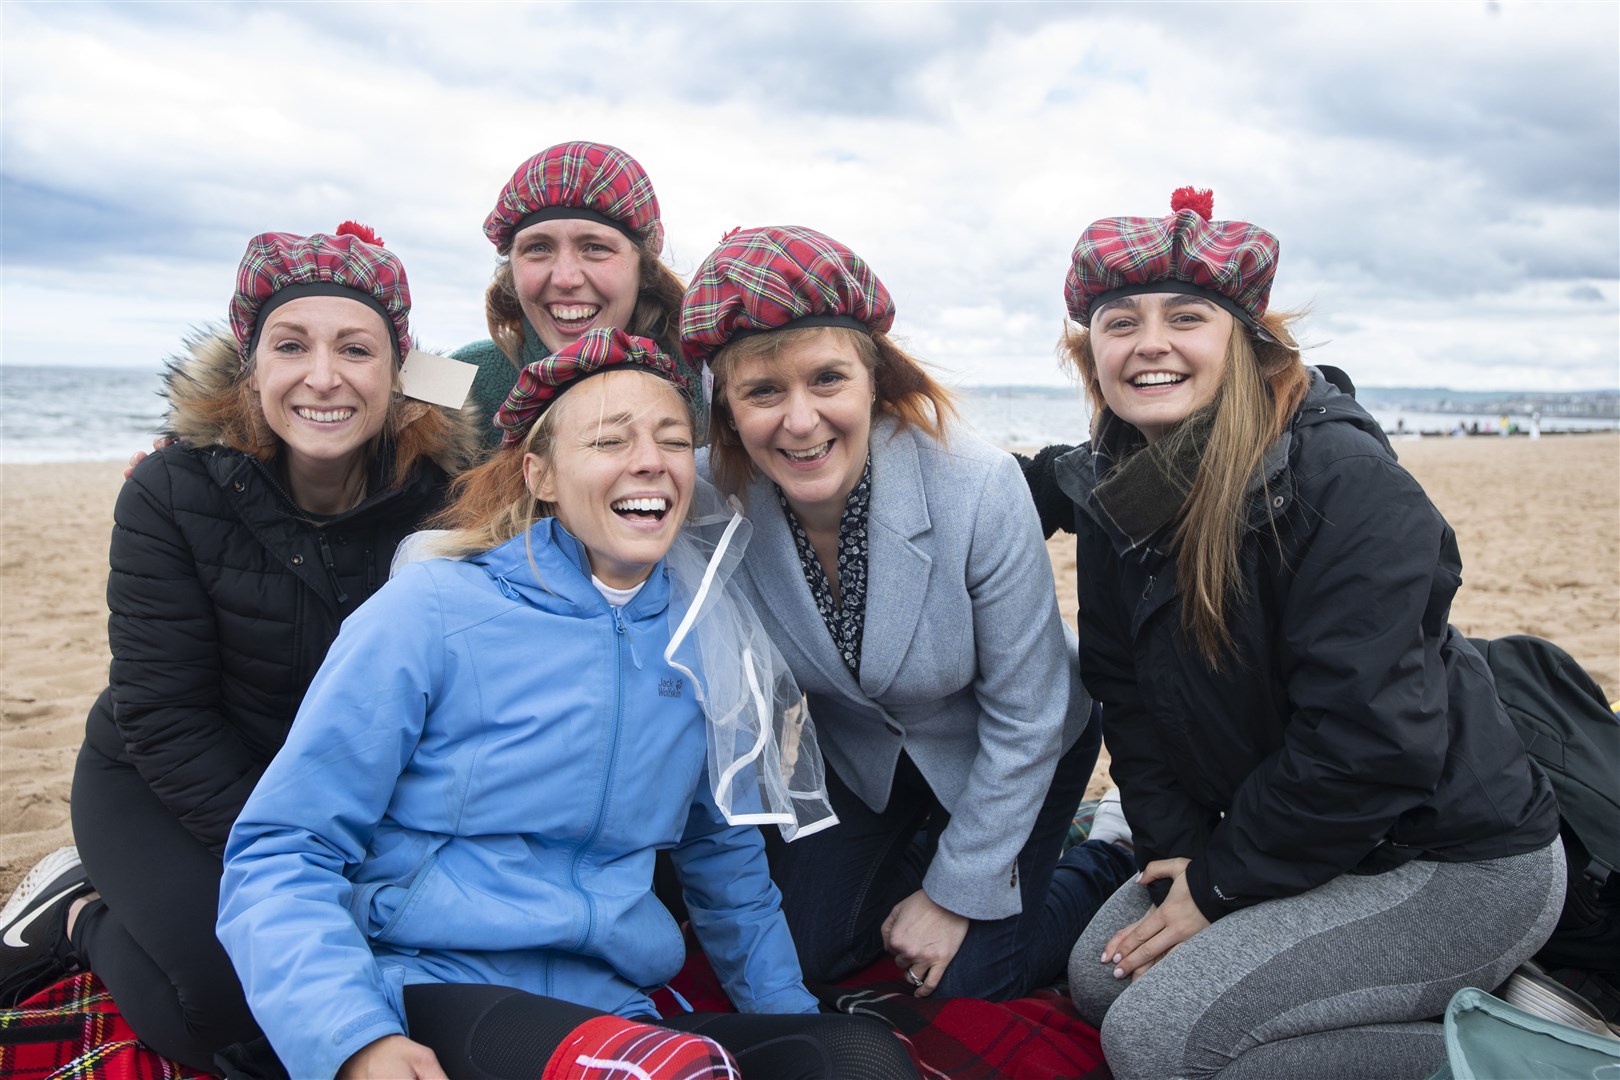 Nicola Sturgeon proved a good sport when she donned a ‘See You Jimmy’ hat when she bumped into a hen party on Portobello beach, Edinburgh, in May (Lesley Martin/PA)